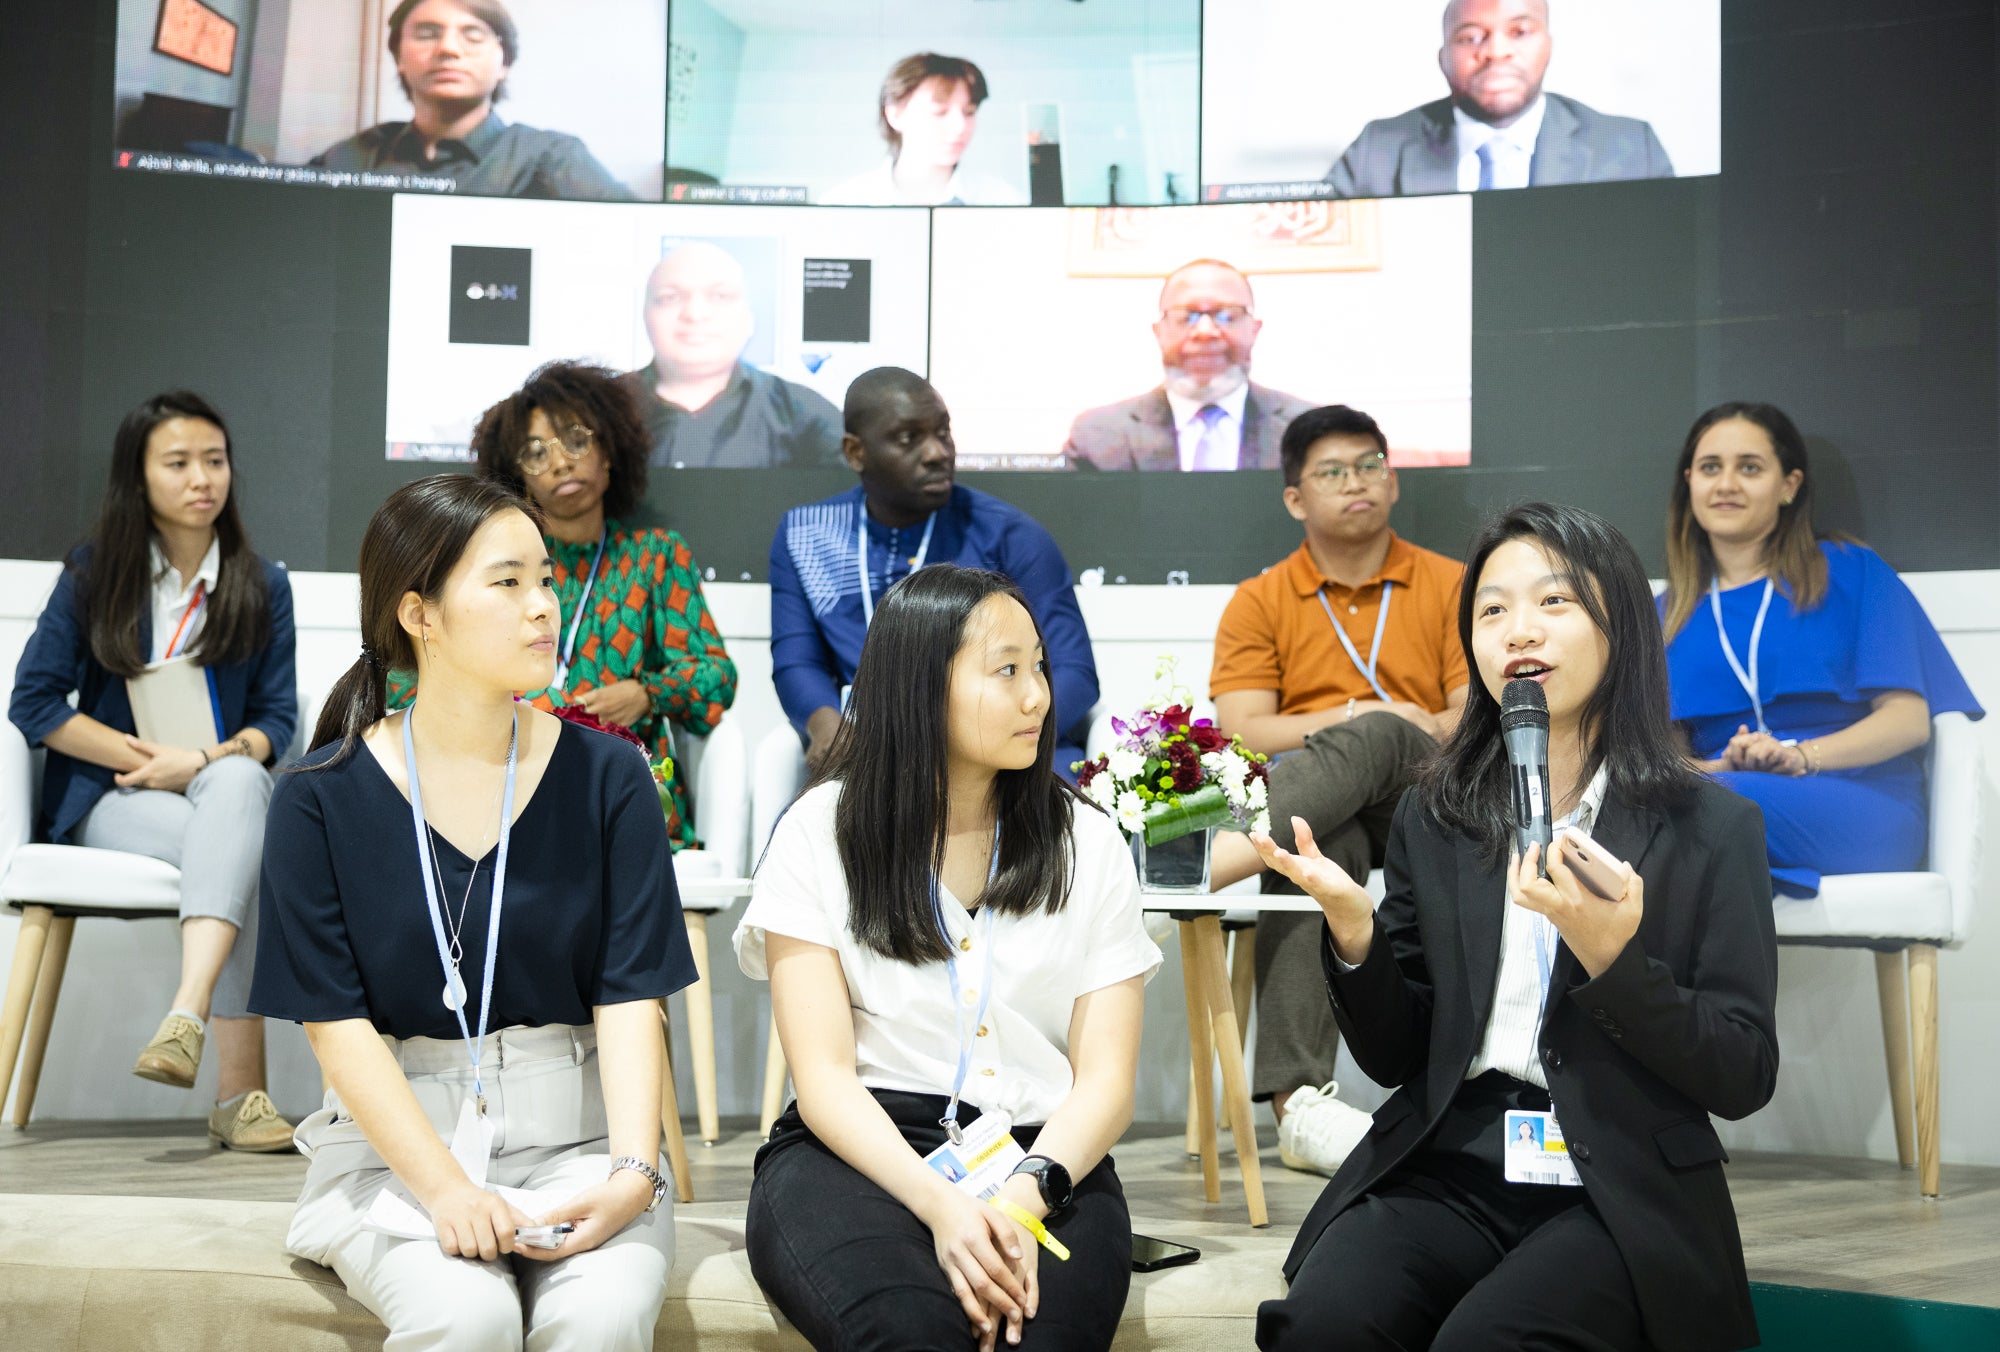 Youth representatives from the Philippines, Taiwan, Nigeria, and more, speak on a panel on climate justice, education, and leadership at the Climate Justice Pavilion.